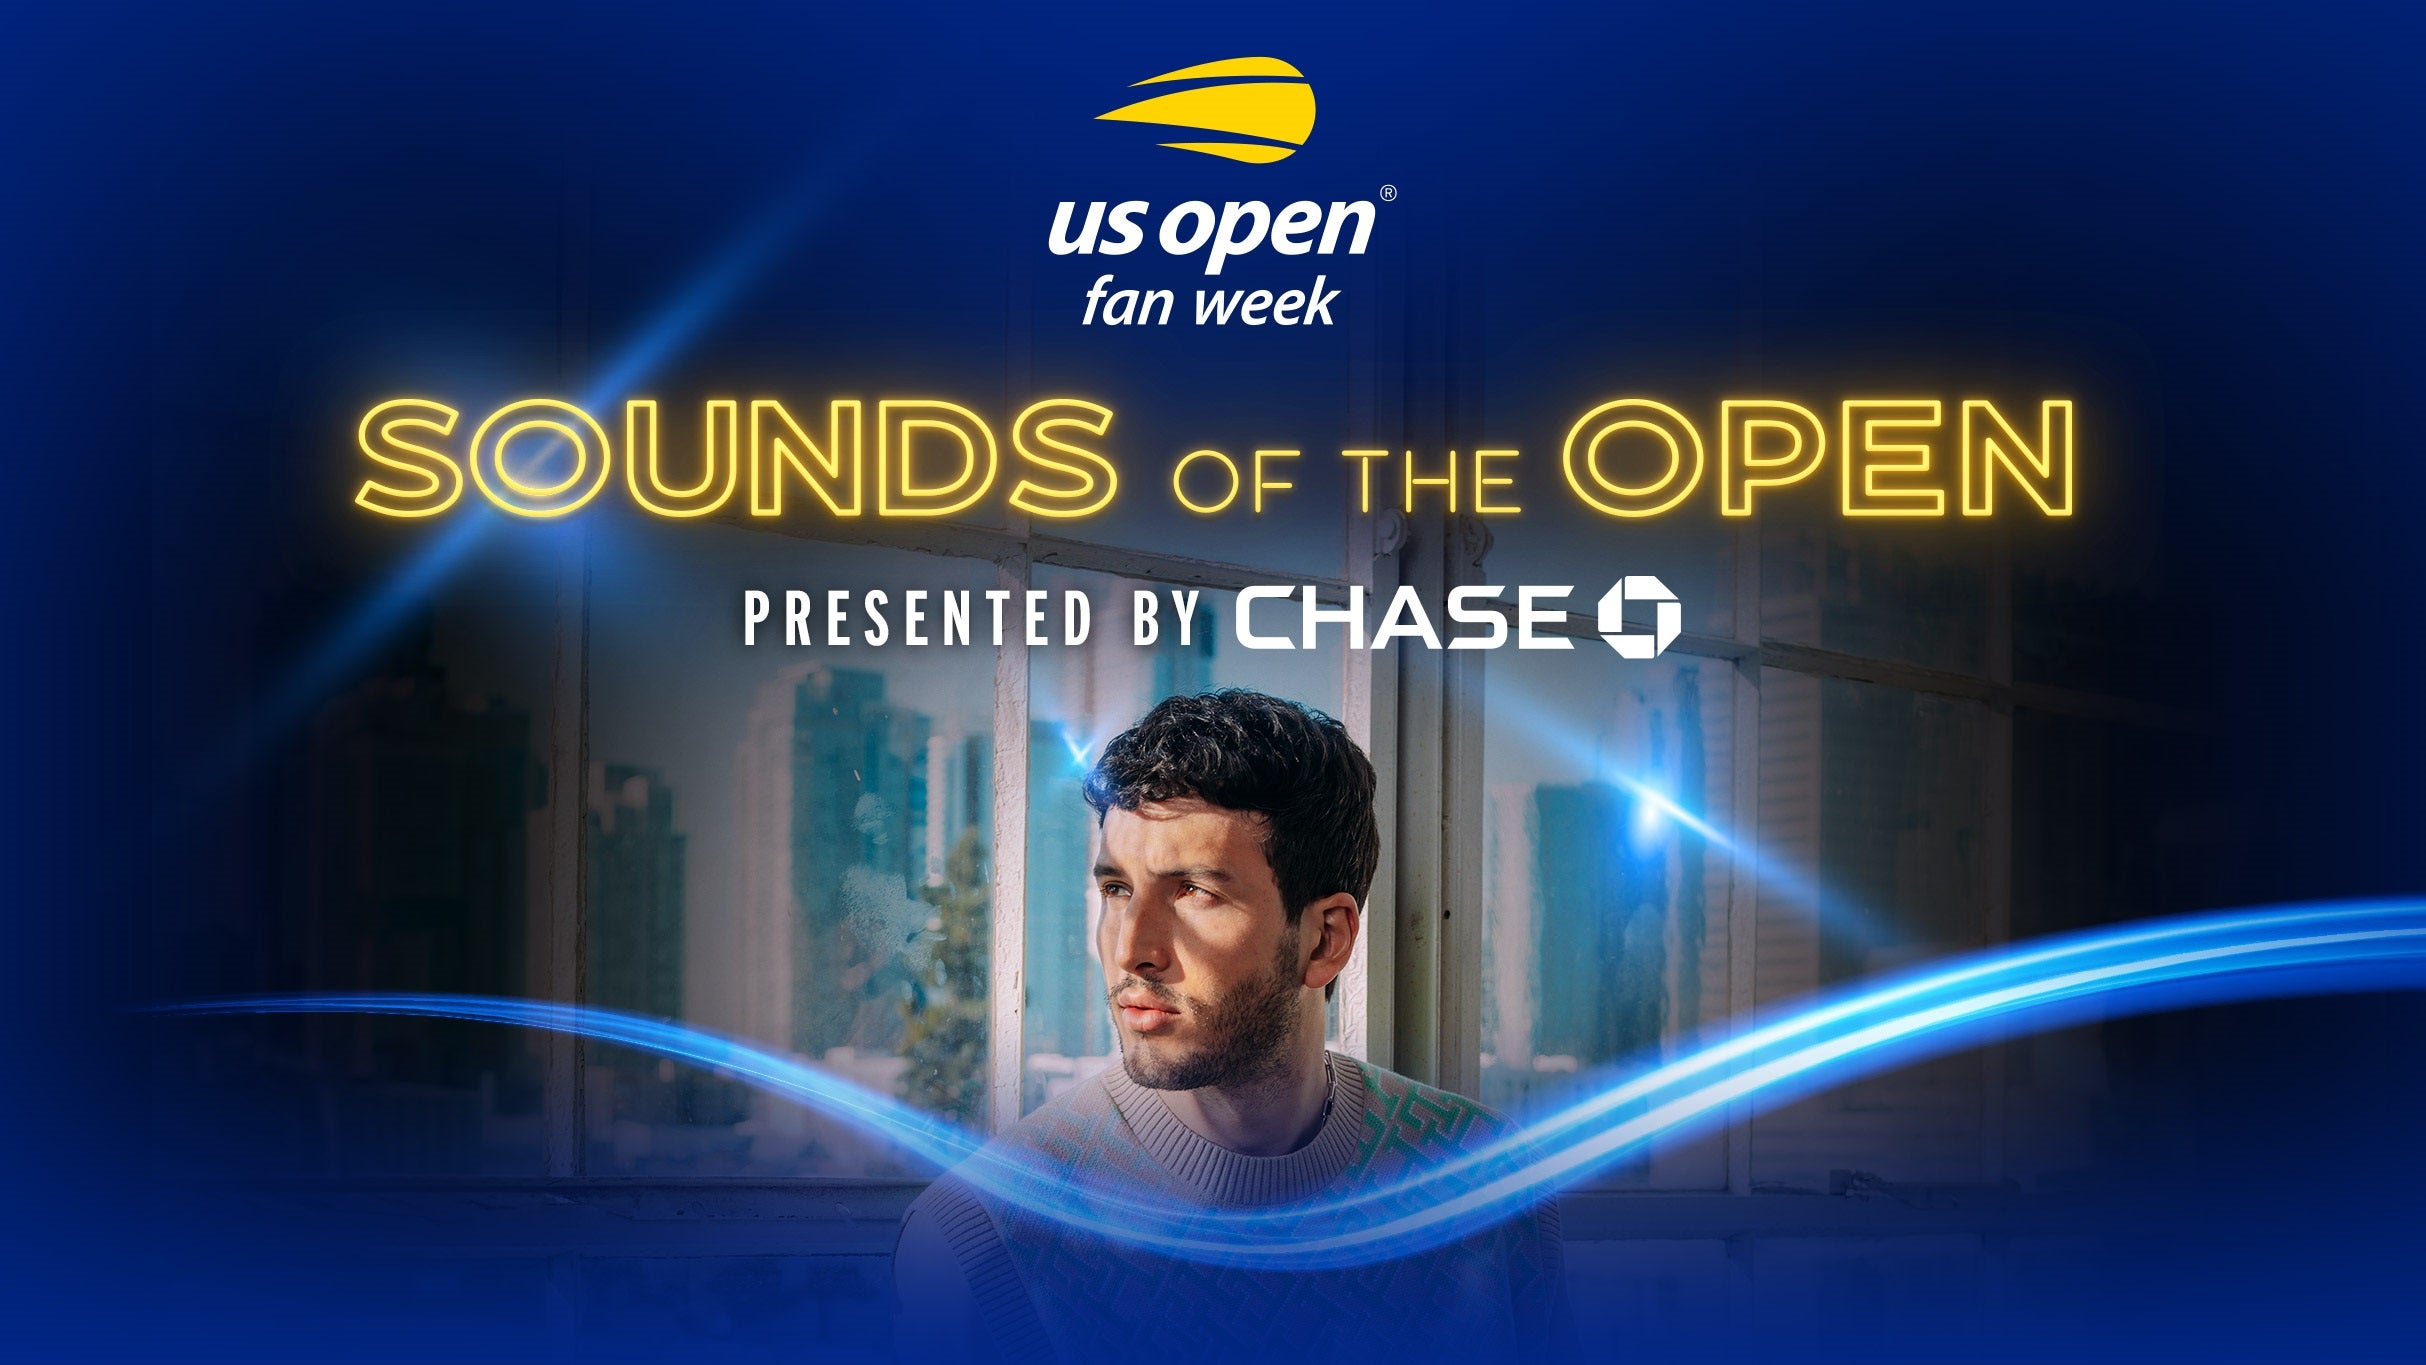 Sounds of the Open presented by CHASE pre-sale password for concert tickets in Flushing, NY (Billie Jean King National Tennis Center)